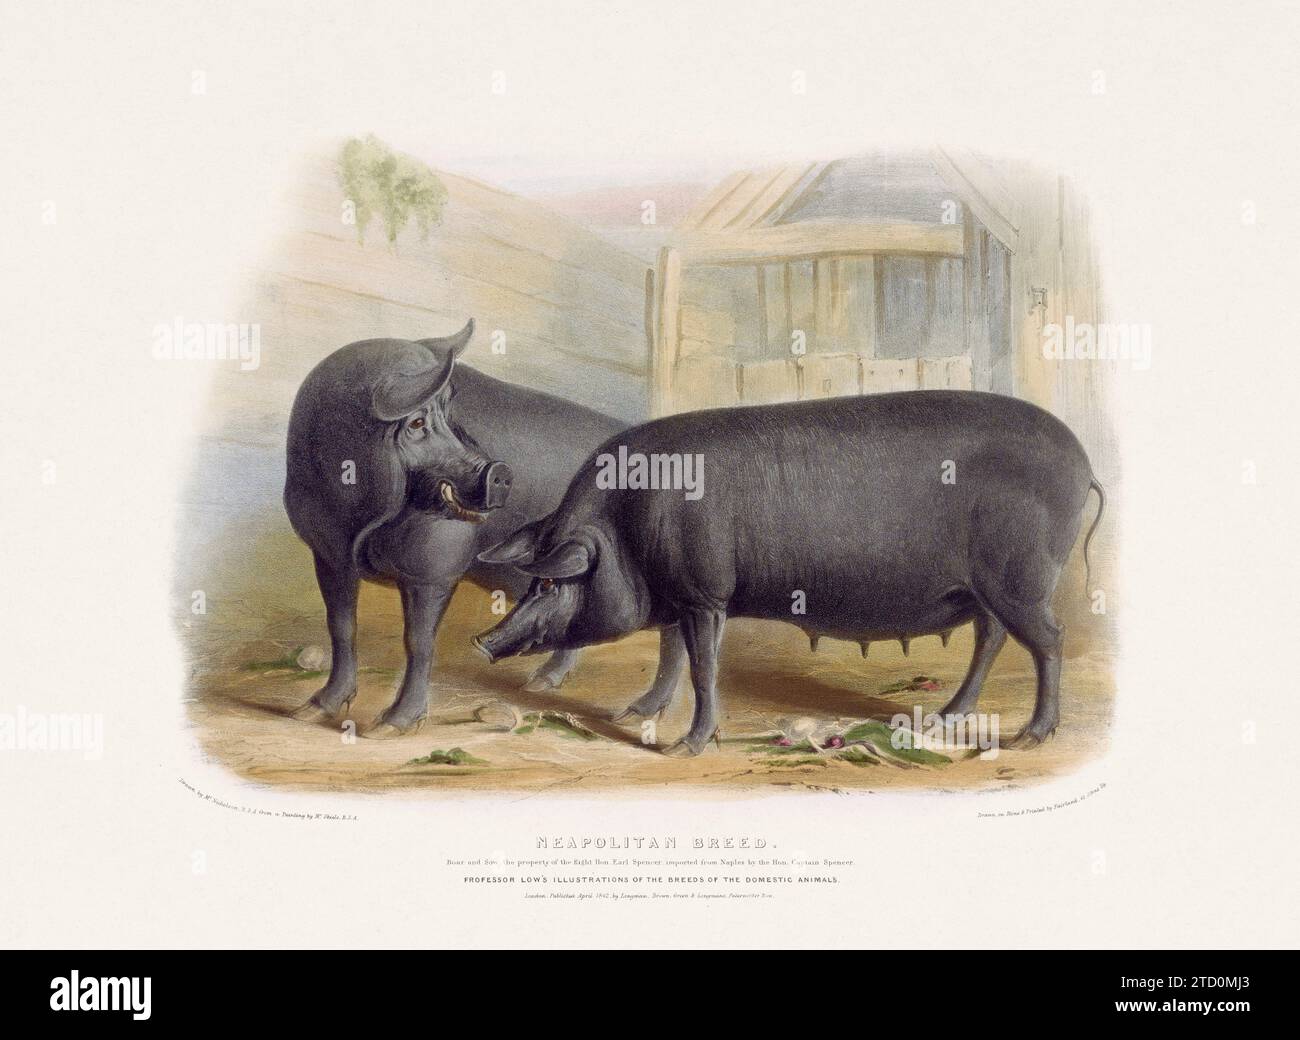 Vintage Pig illustration from a mid-19th-century book on domestic animal breeds. Stock Photo